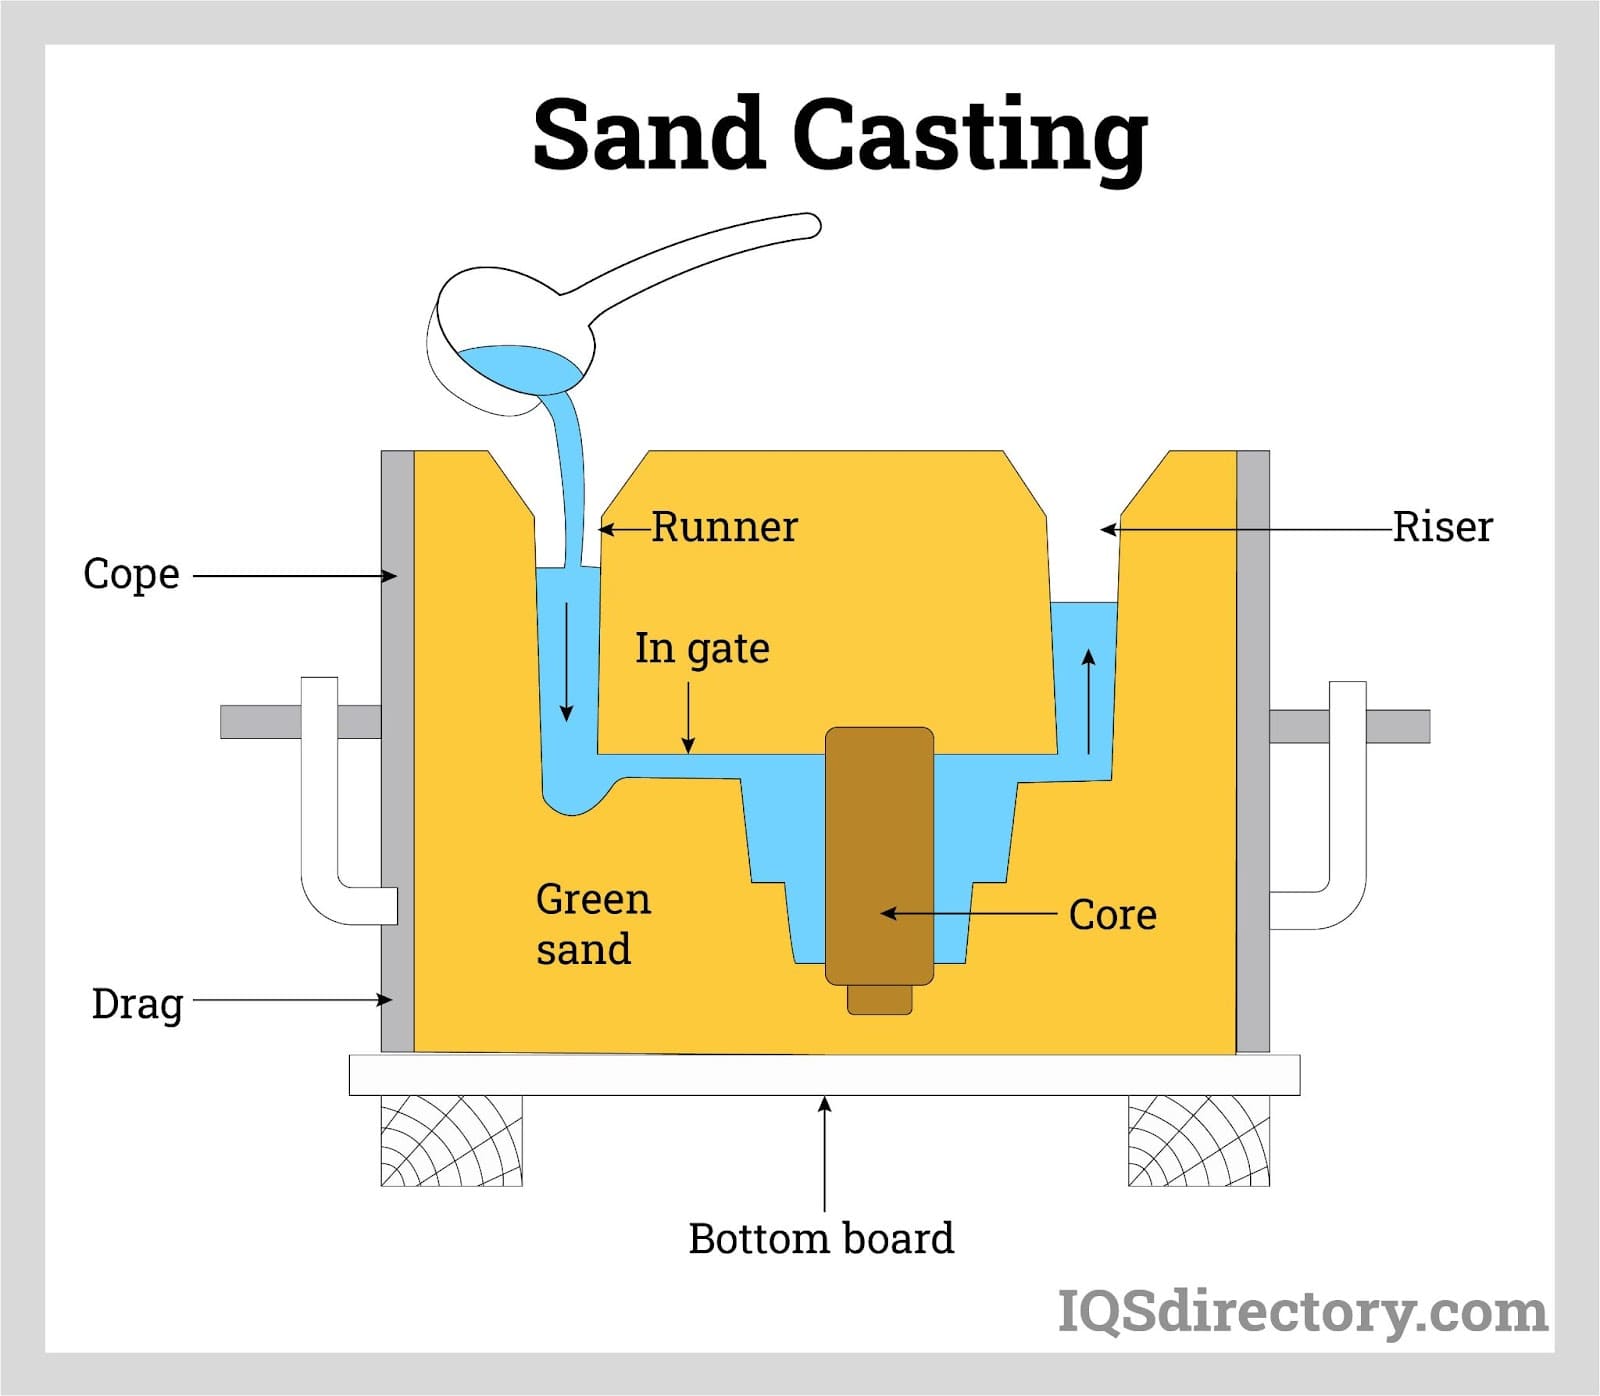 Sand Casting: Construction, Types, Applications, and Advantages